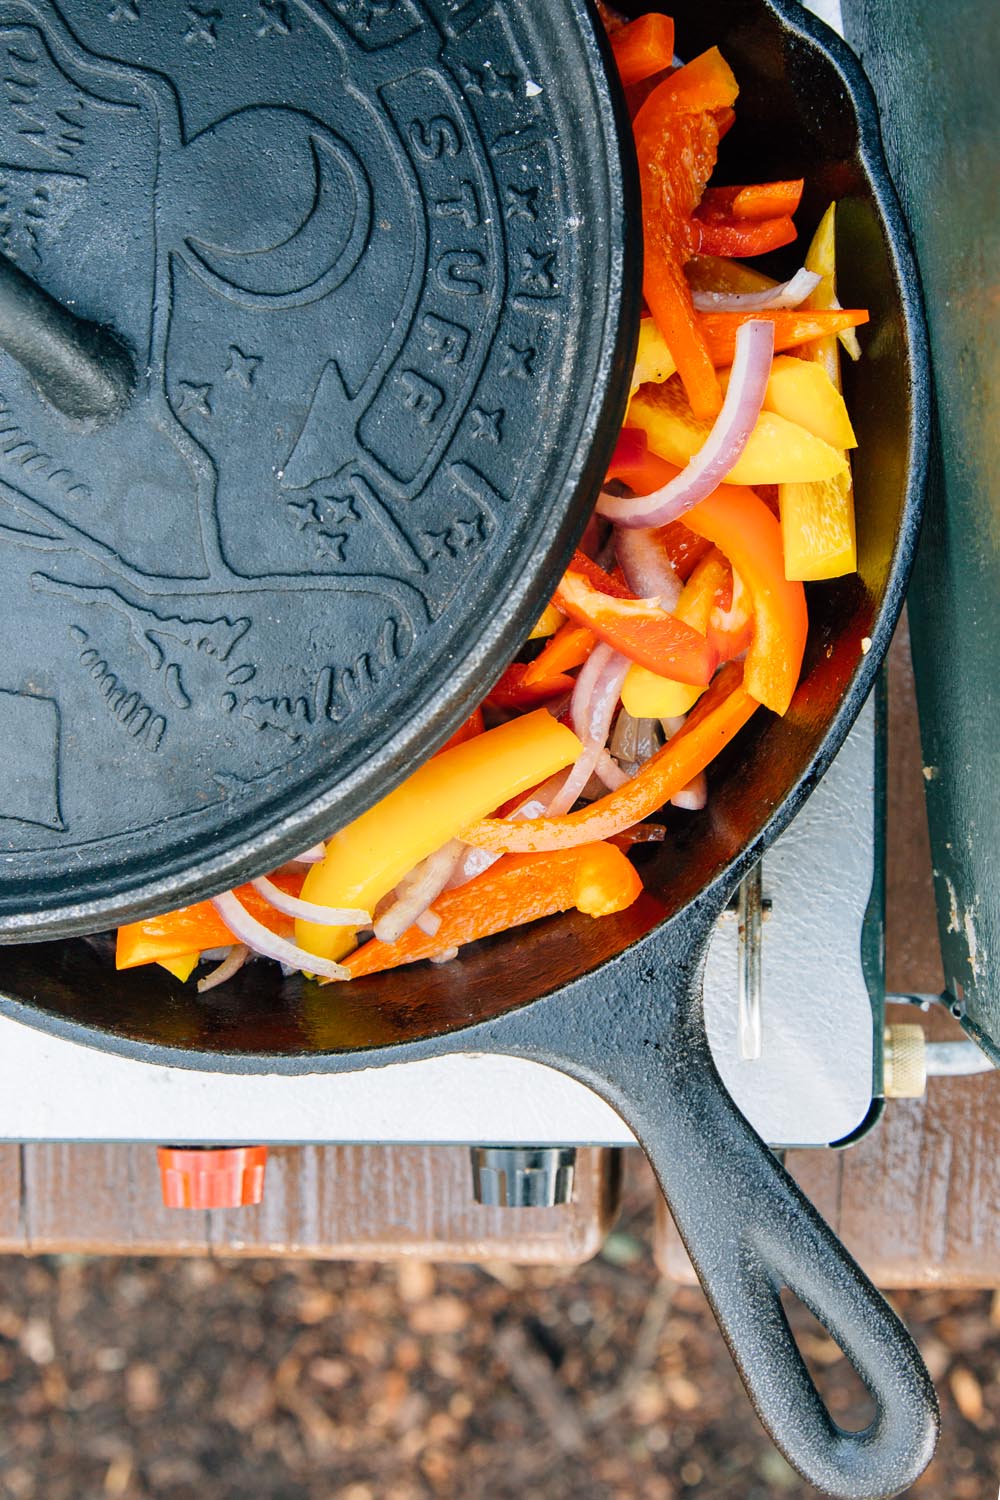 Veggies cooking in a cast iron skillet with a lid